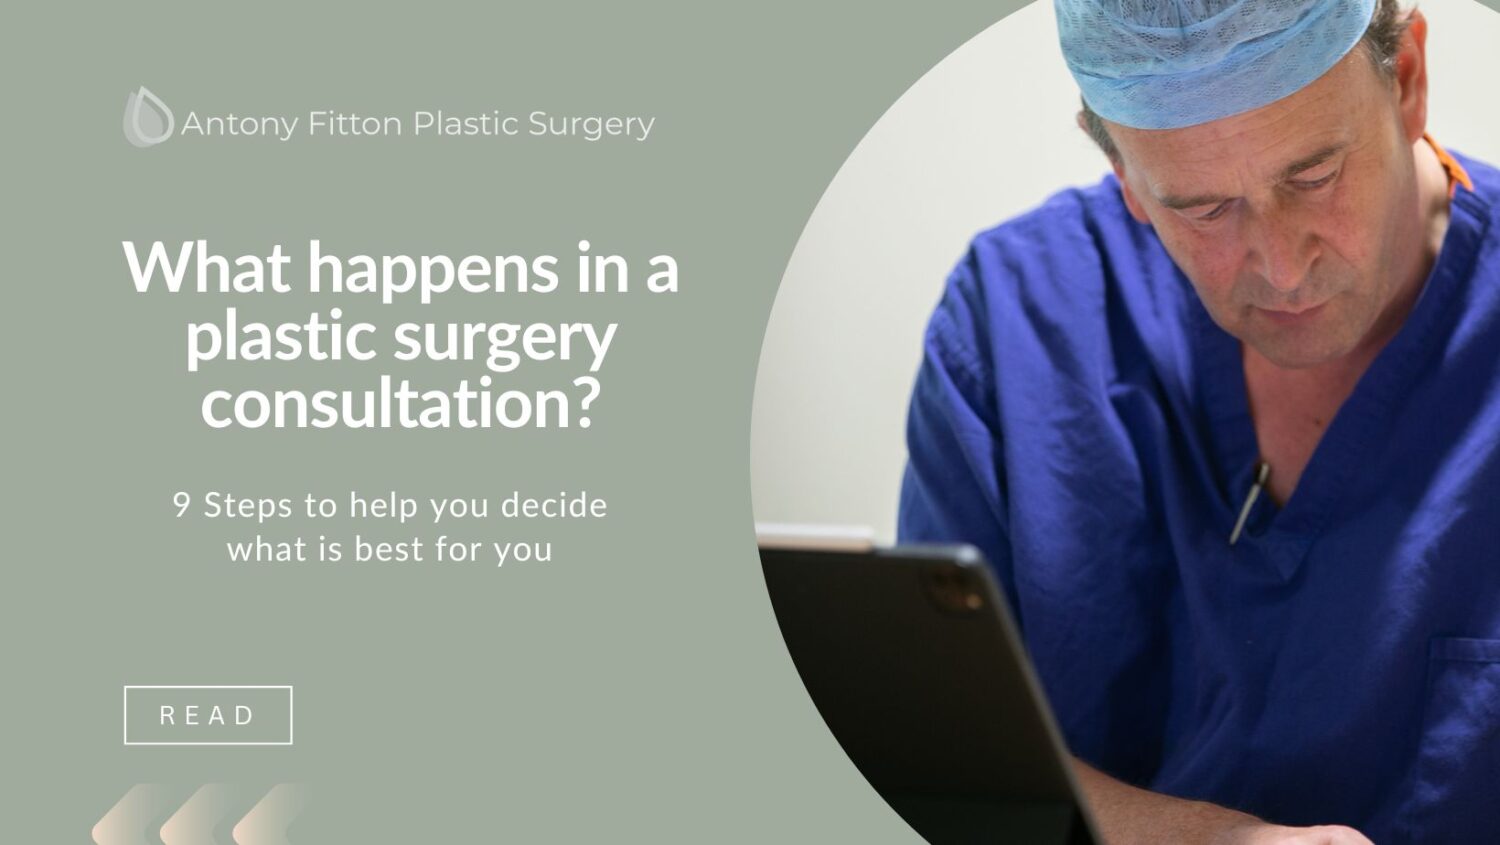 What happens in a plastic surgery consultation?